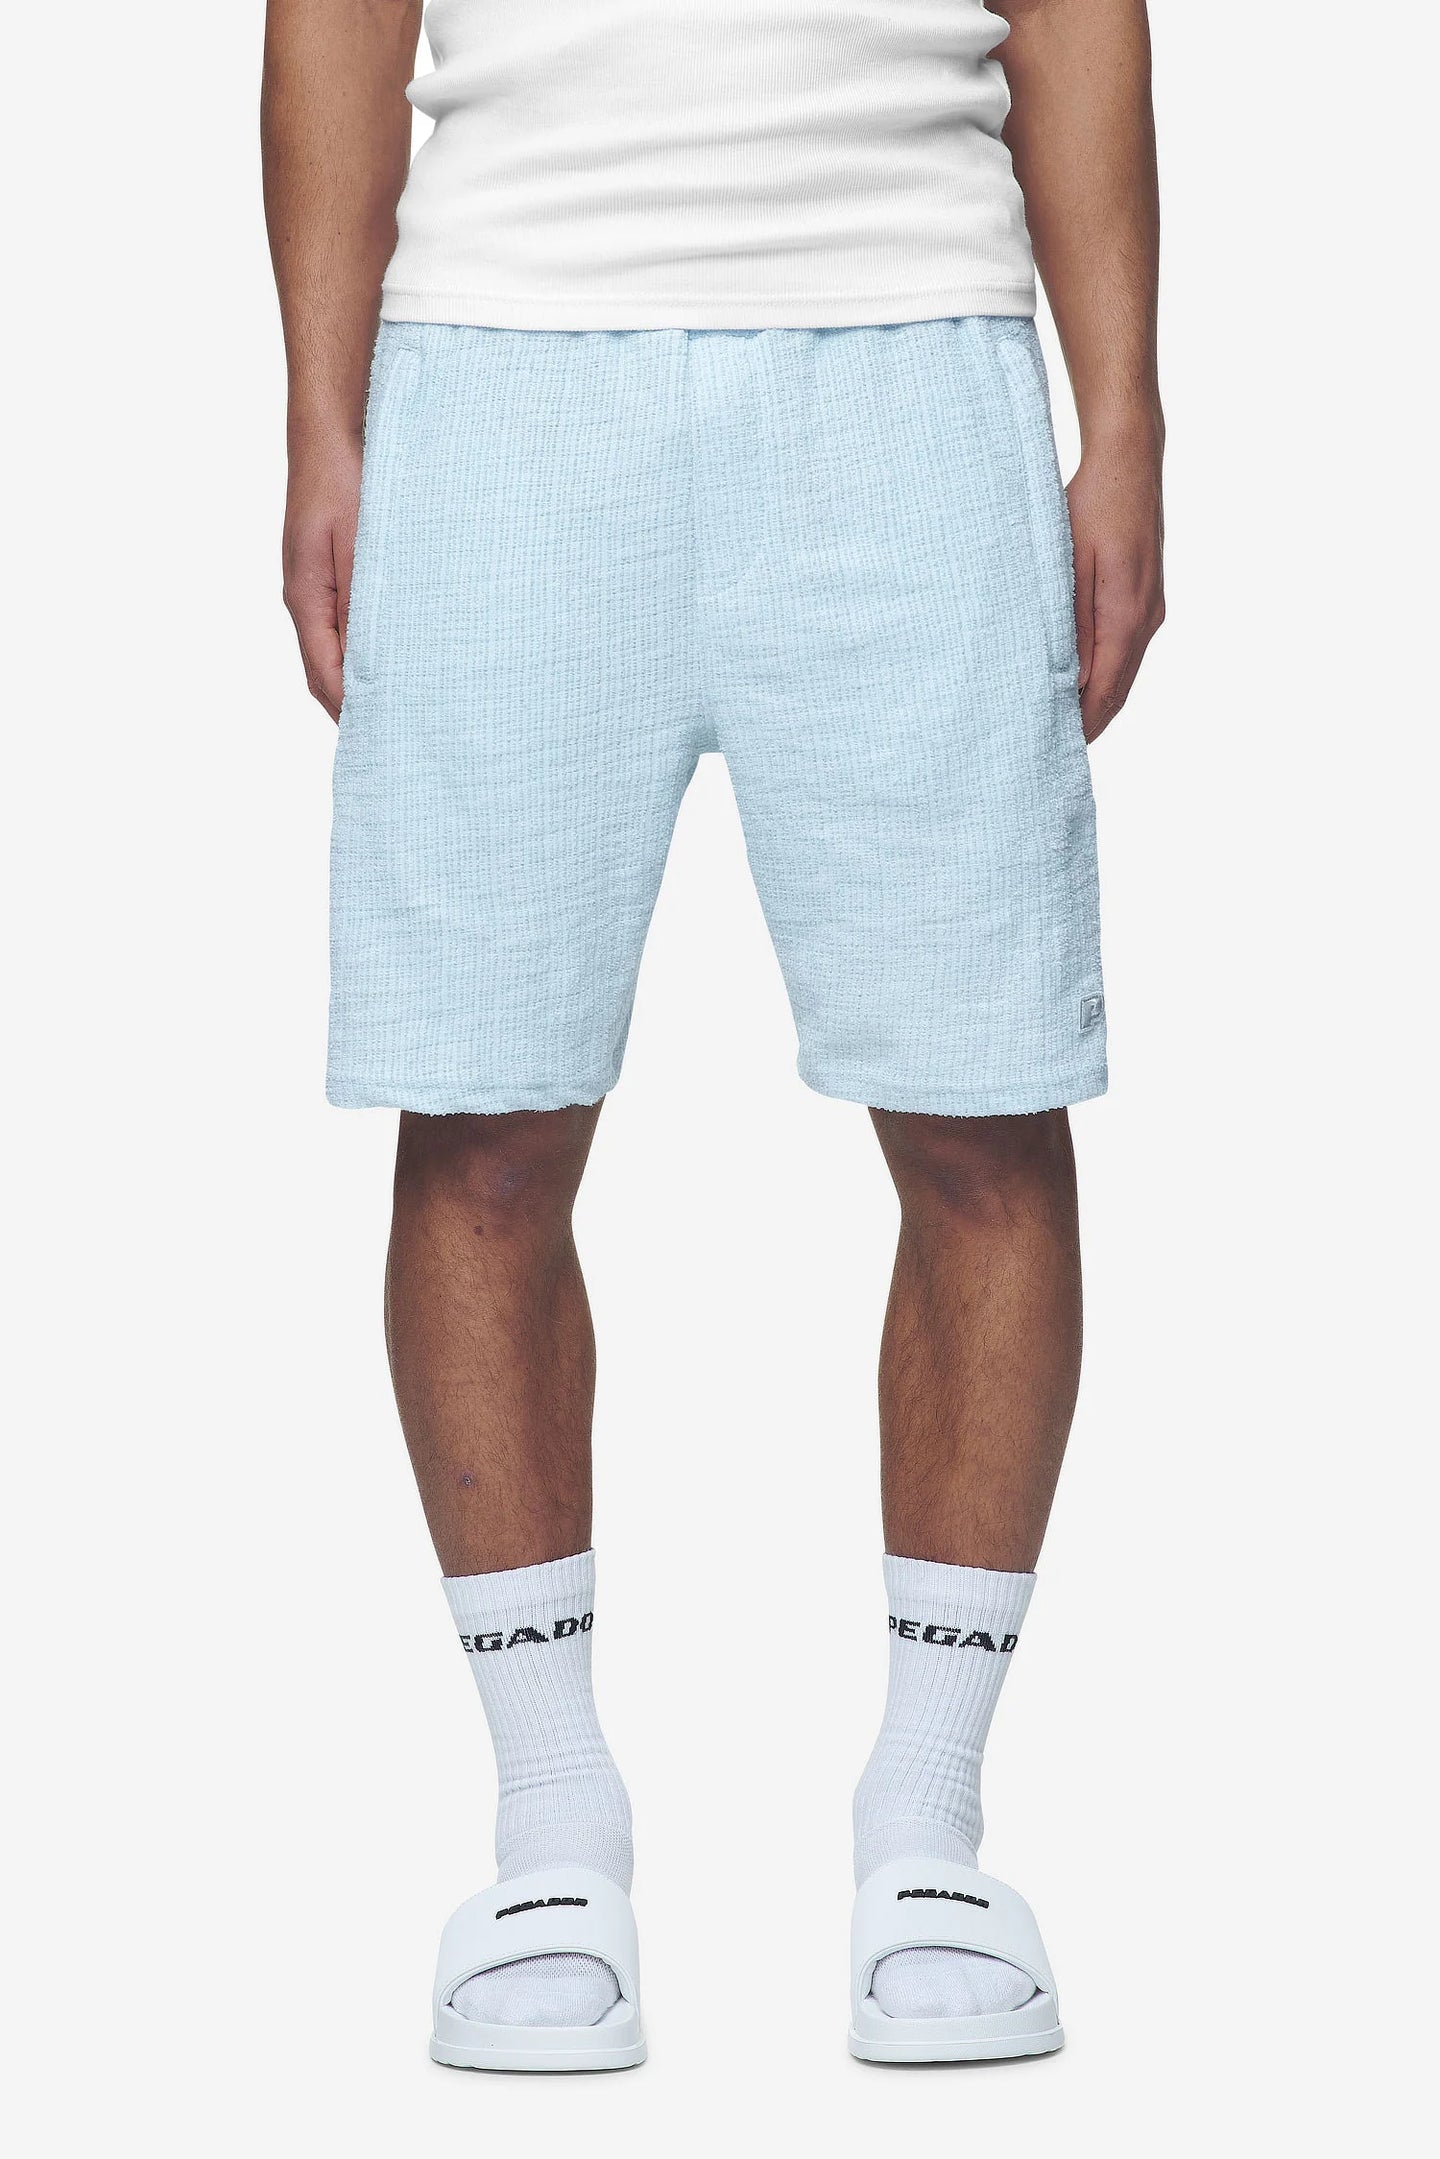 Libco Structured Knit Shorts Baby Blue - Pegador - coming soon